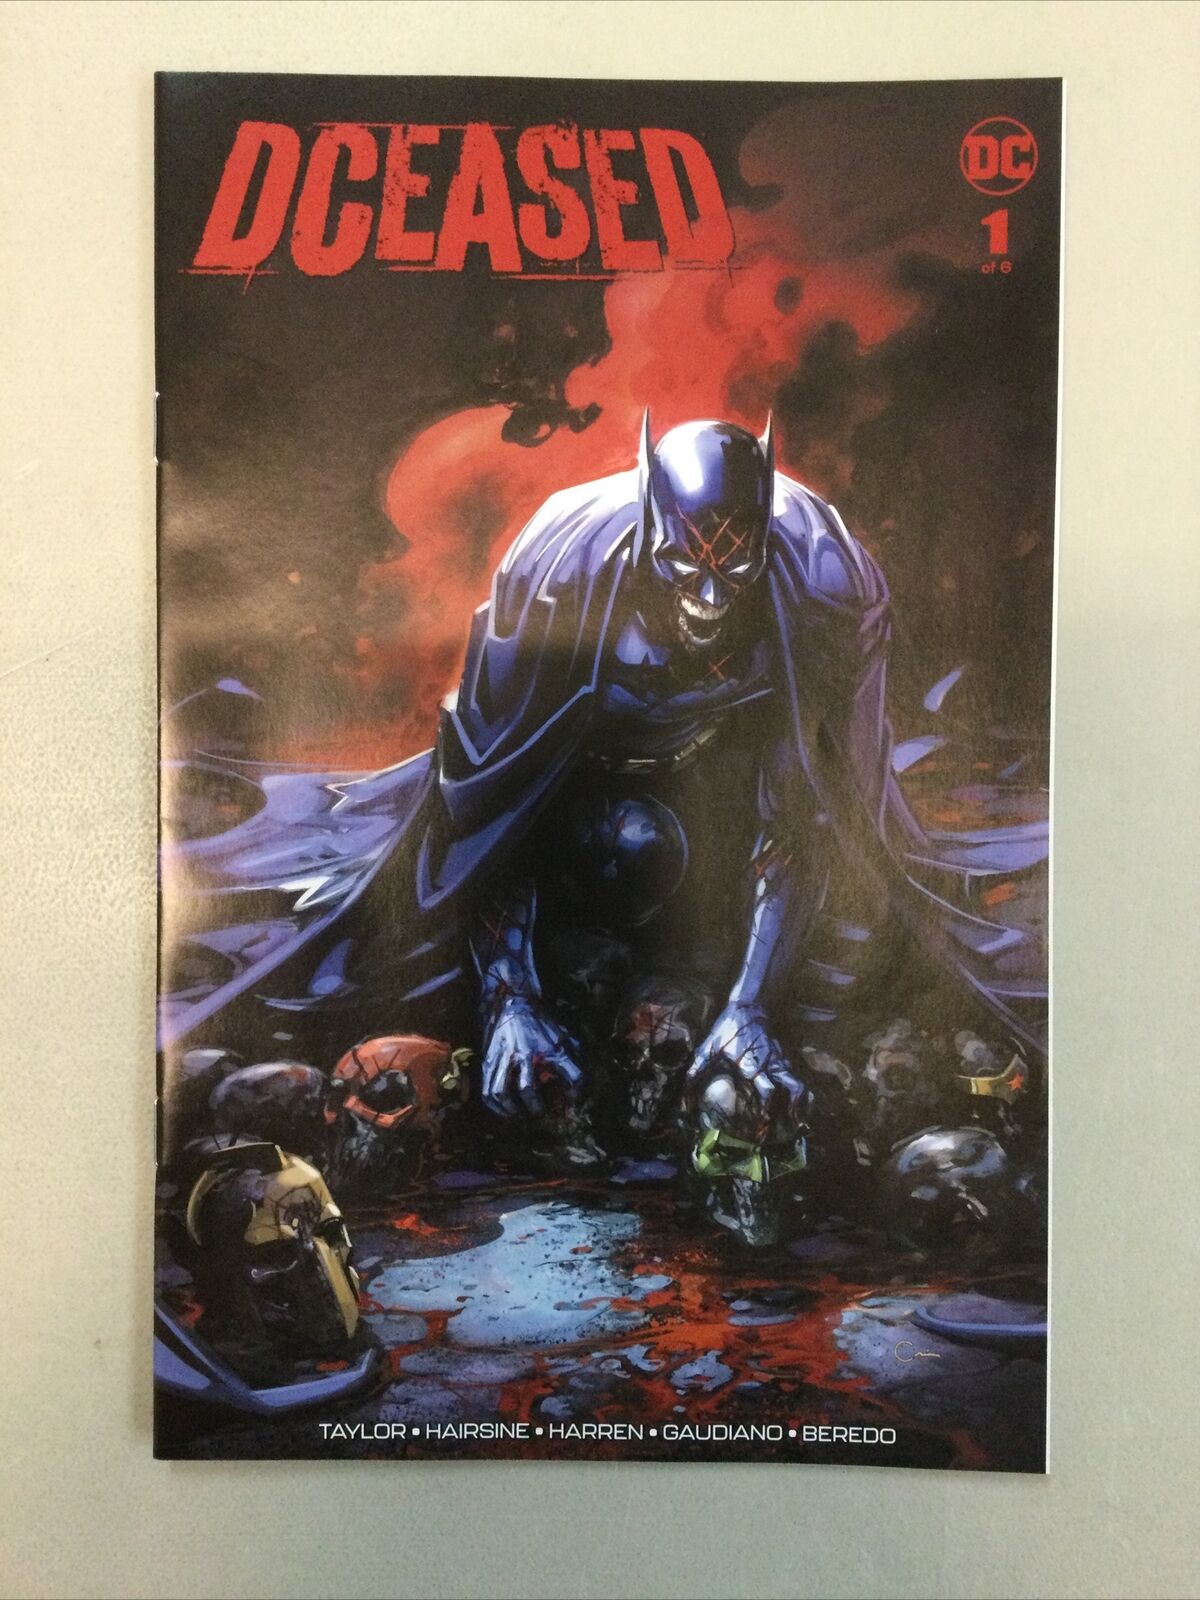 Dceased 1 Crain Trade Variant Limited To 1500 W/ COA DC Comics 2019 STOCK PHOTO